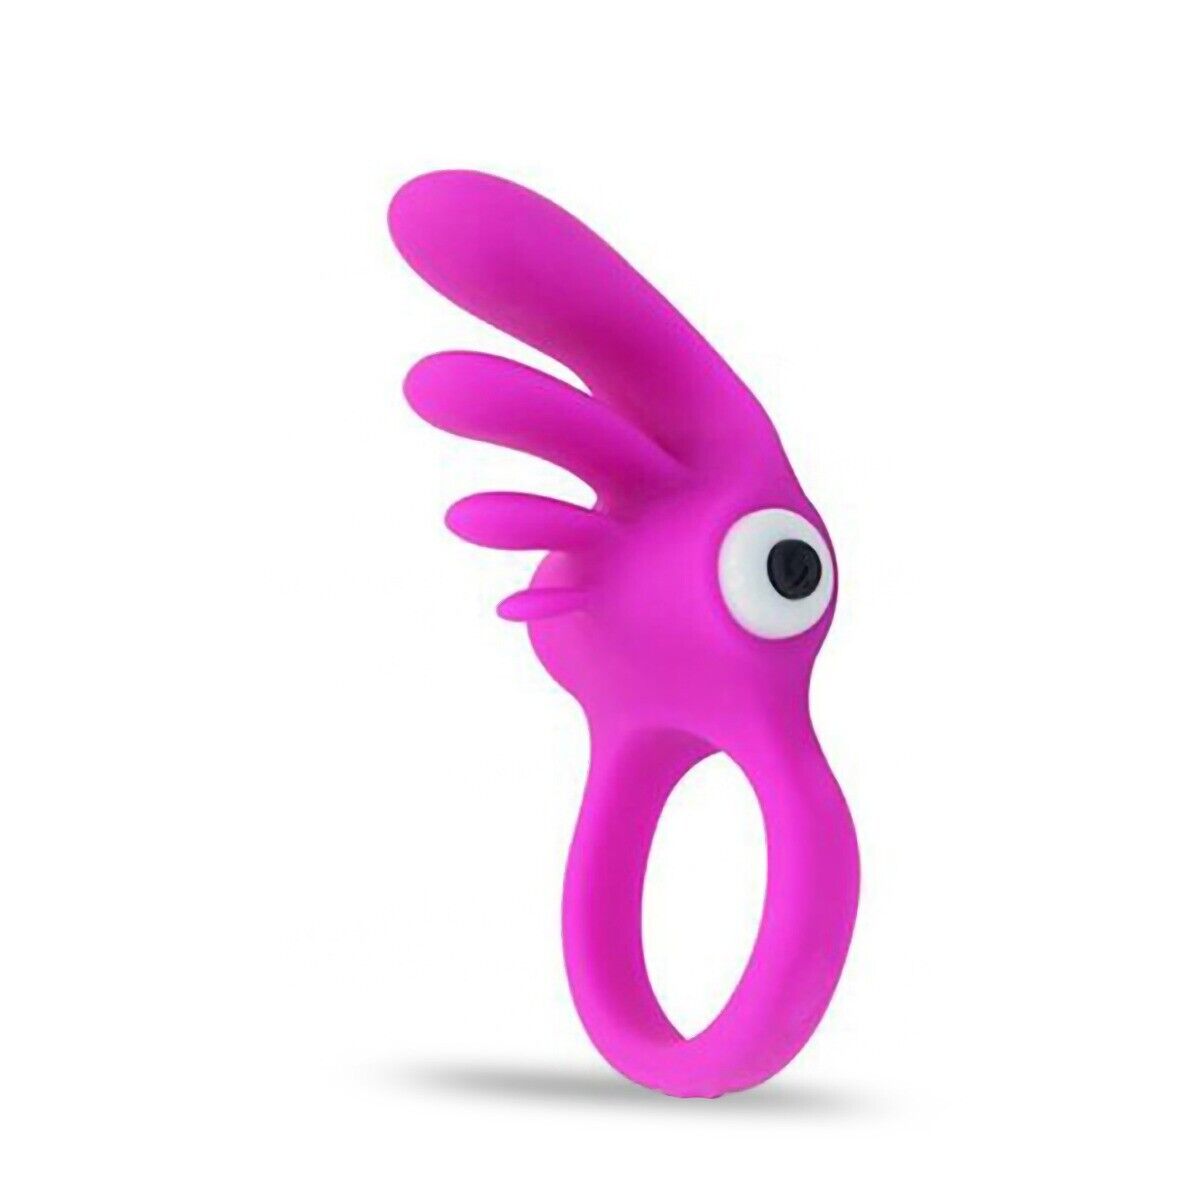 Silicone Vibrating Clit Stimulator Penis Enhancer Cock Ring Sex-toys for Couples